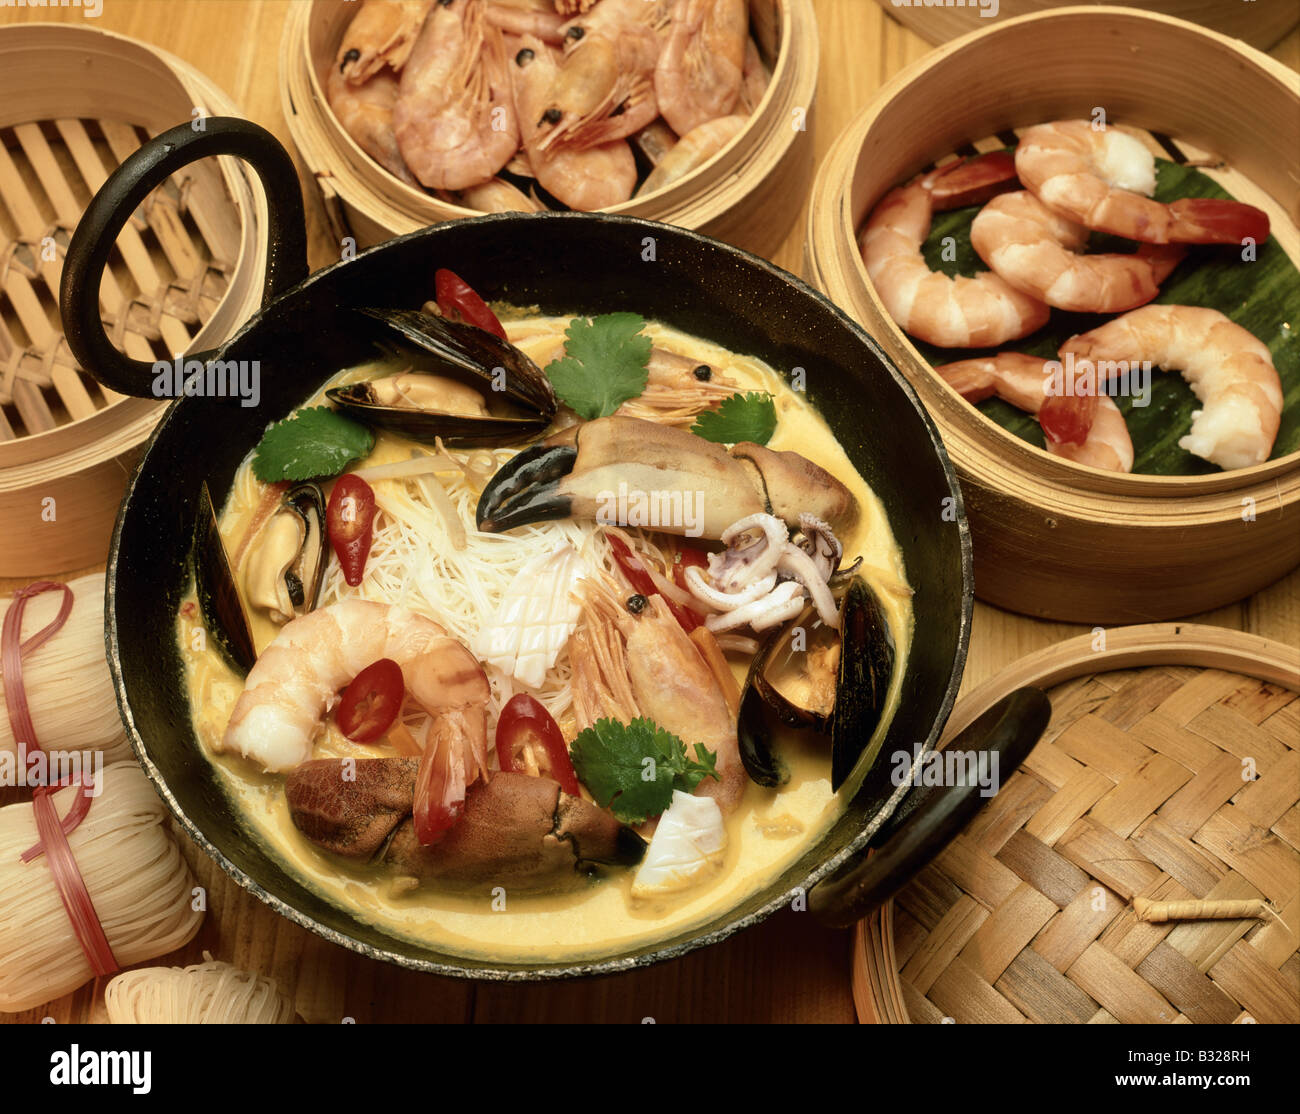 Nonya Malaysia Singapore Two handled wok Spicey seafood coconut soup dish Noodles Steam baskets SEAFOOD LAKSA SINGAPORE Stock Photo